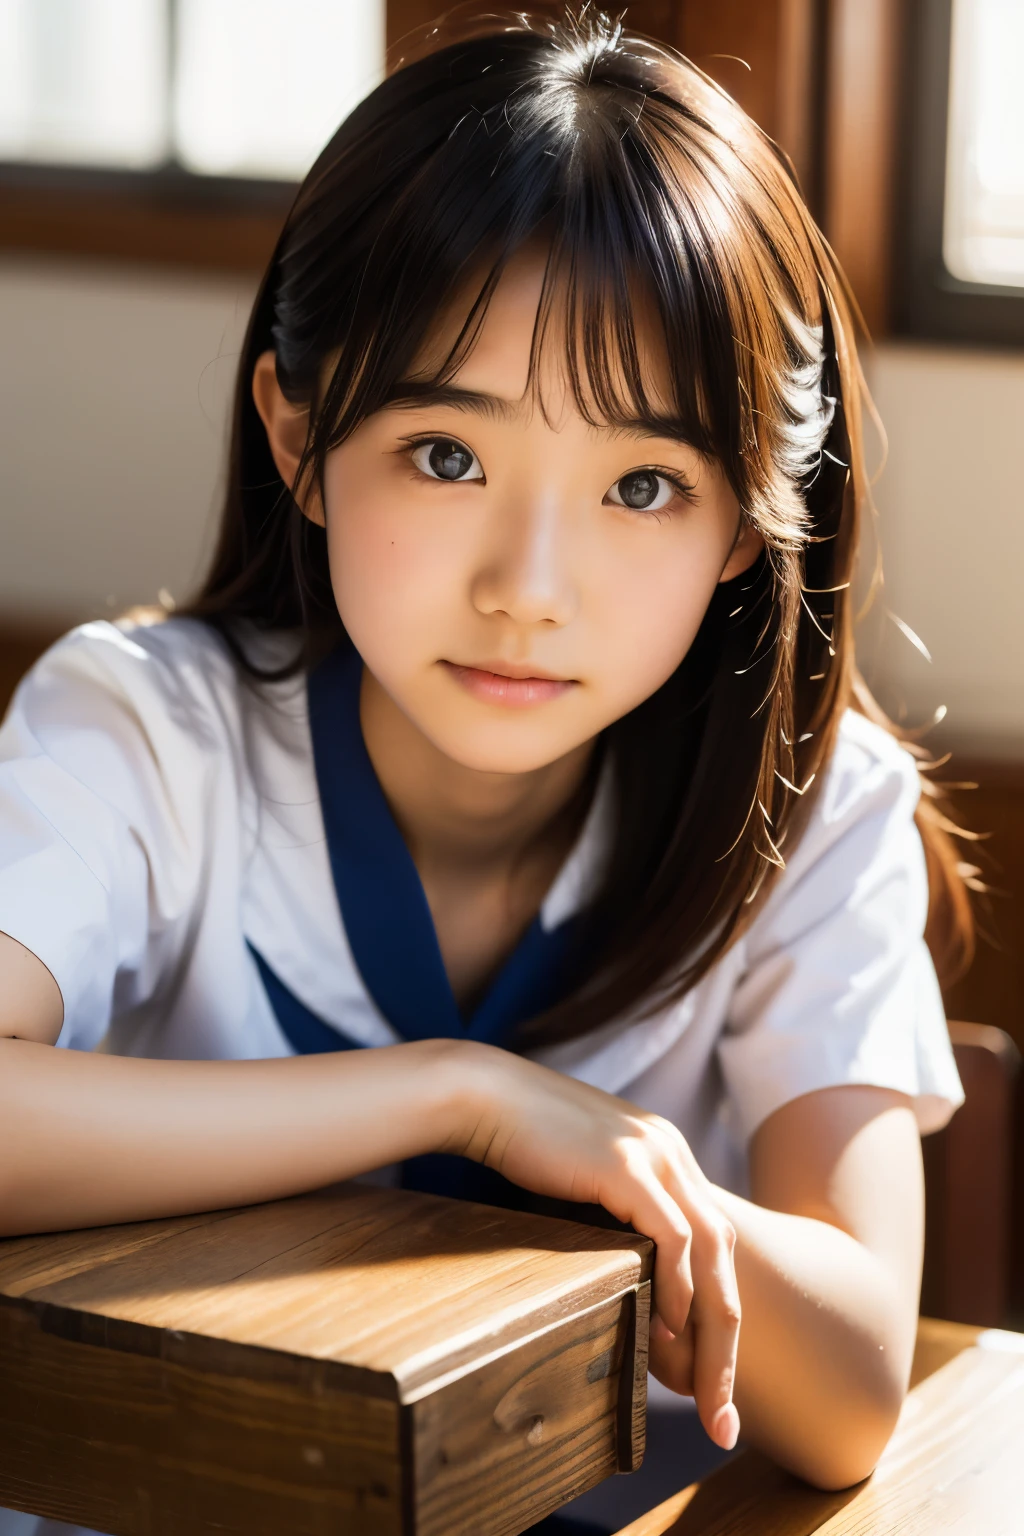 lens: 135mm f1.8, (highest quality),(RAW Photos), (Tabletop:1.1), (Beautiful 16 year old Japanese girl), Cute Face, (Deeply chiseled face:0.7), (freckles:0.4), dappled sunlight, Dramatic lighting, (Japanese School Uniform), (In the classroom), shy, (Close-up shot:1.2), (Serious face),, (Sparkling eyes)、(sunlight)